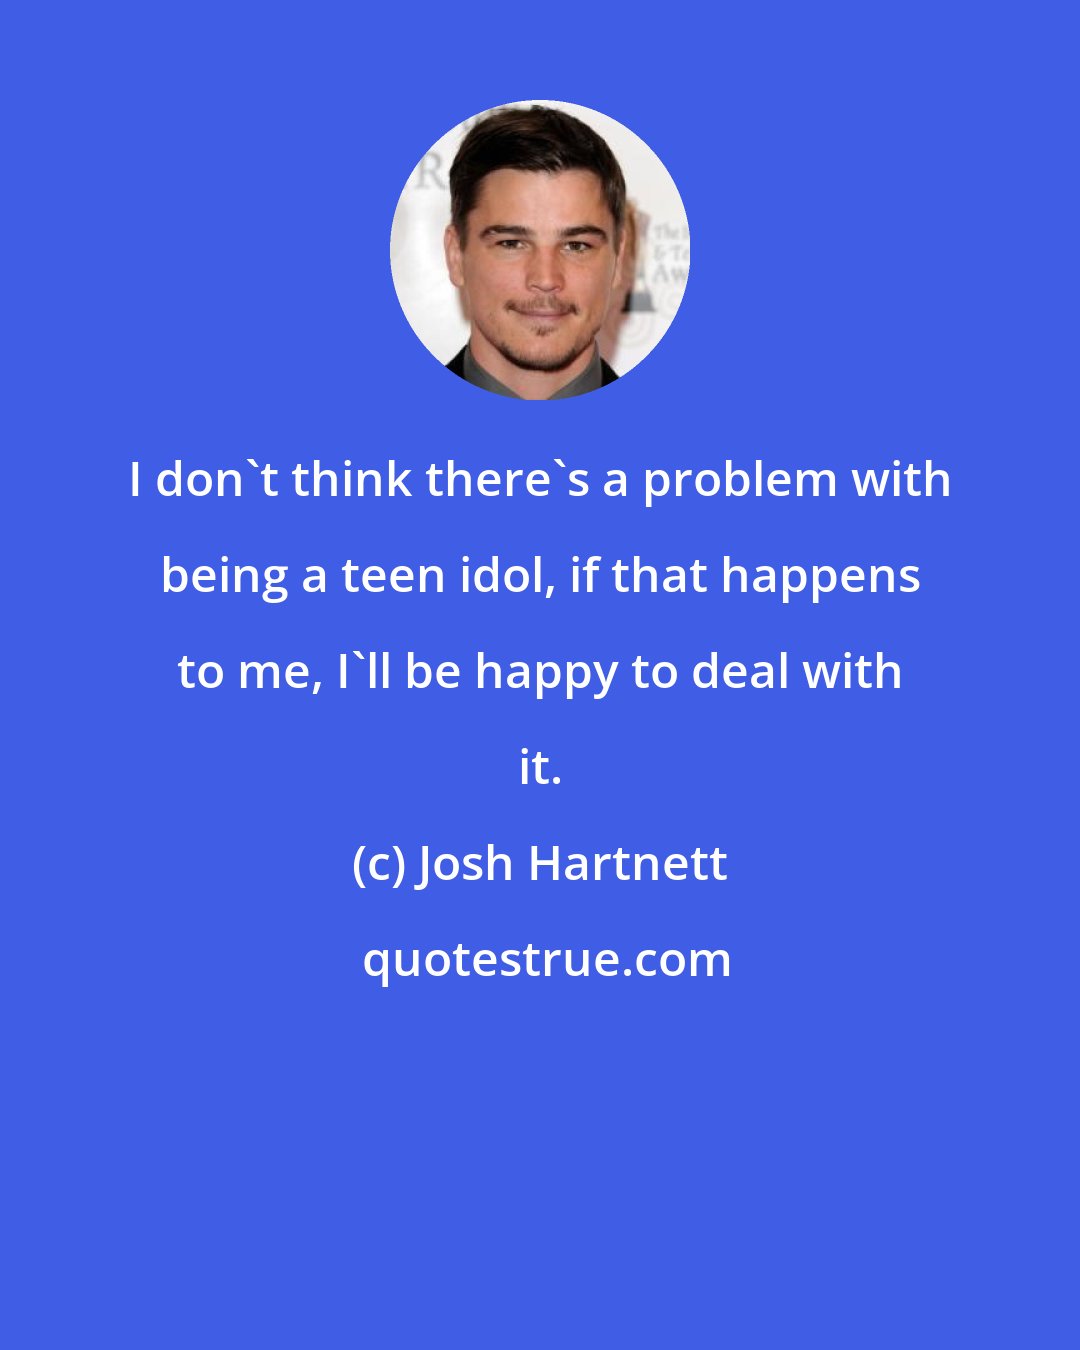 Josh Hartnett: I don't think there's a problem with being a teen idol, if that happens to me, I'll be happy to deal with it.